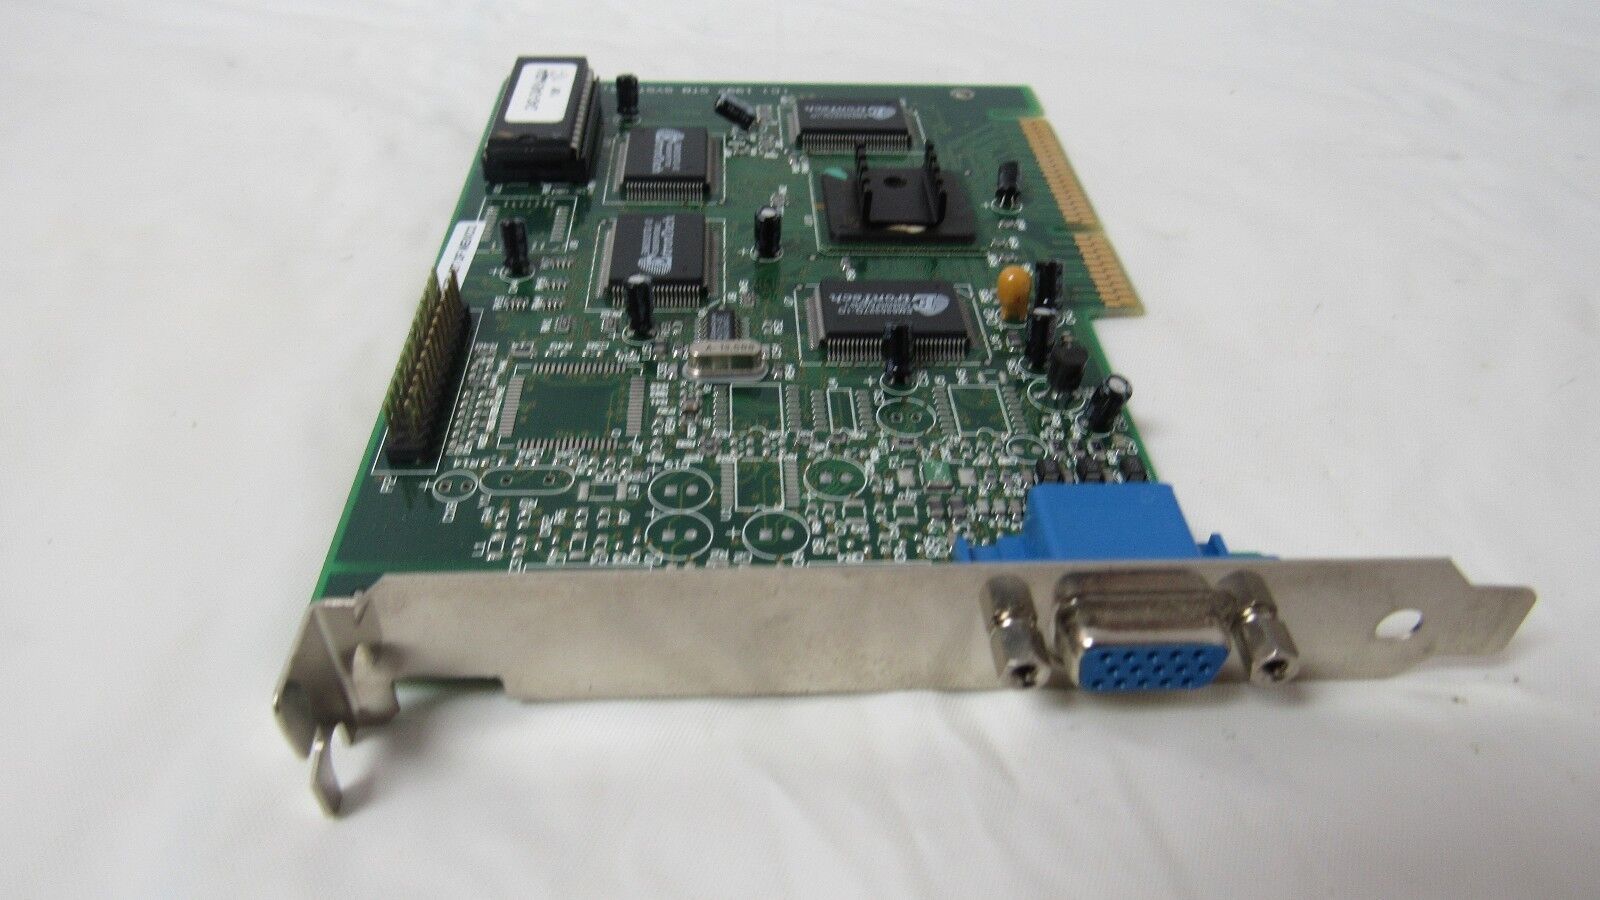 STB SYSTEMS 1X0-0620-305 VIDEO CARD